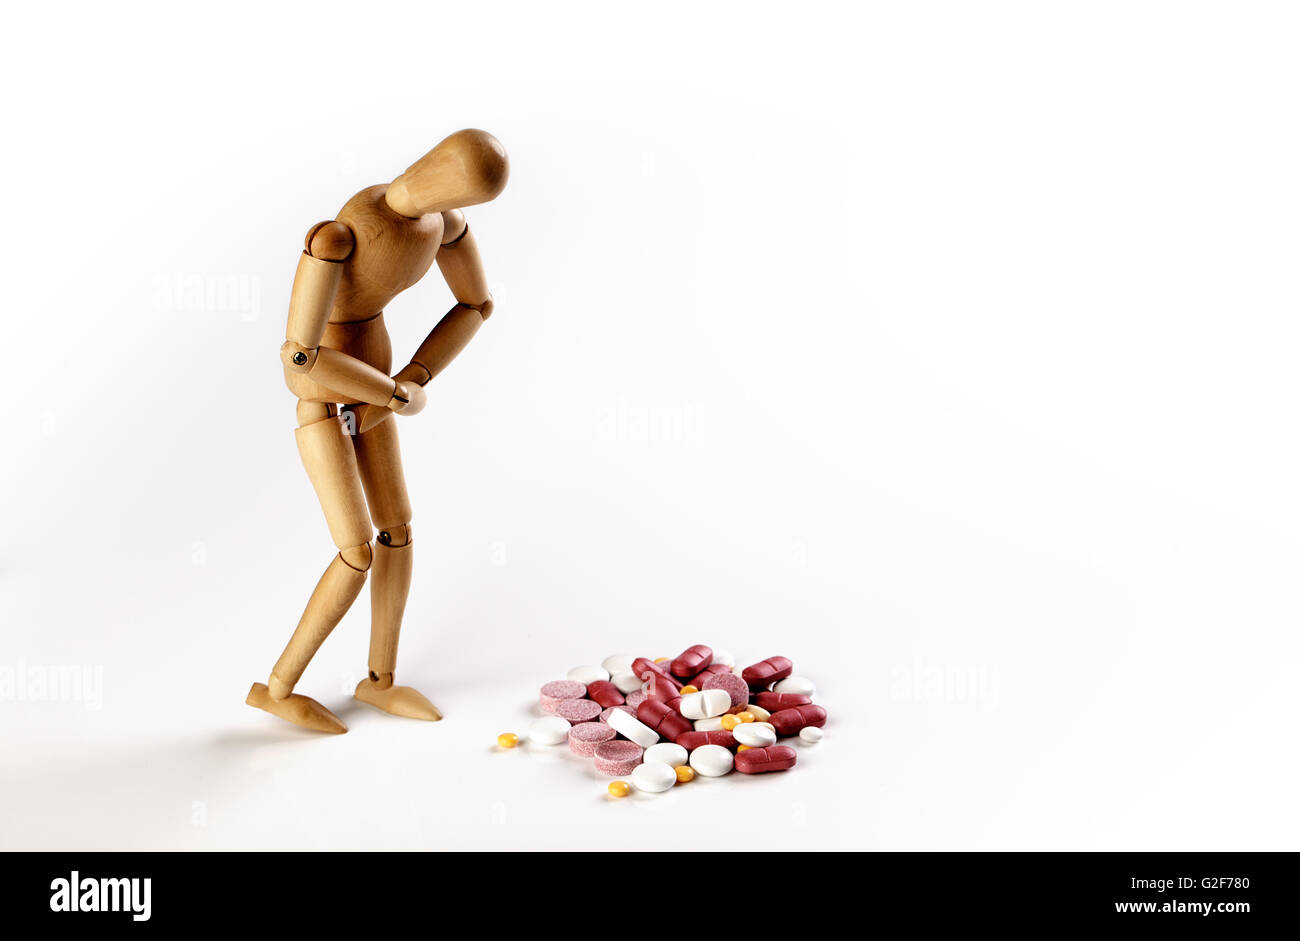 Sick puppet with stomach cramps and pile of colorful pills Stock Photo